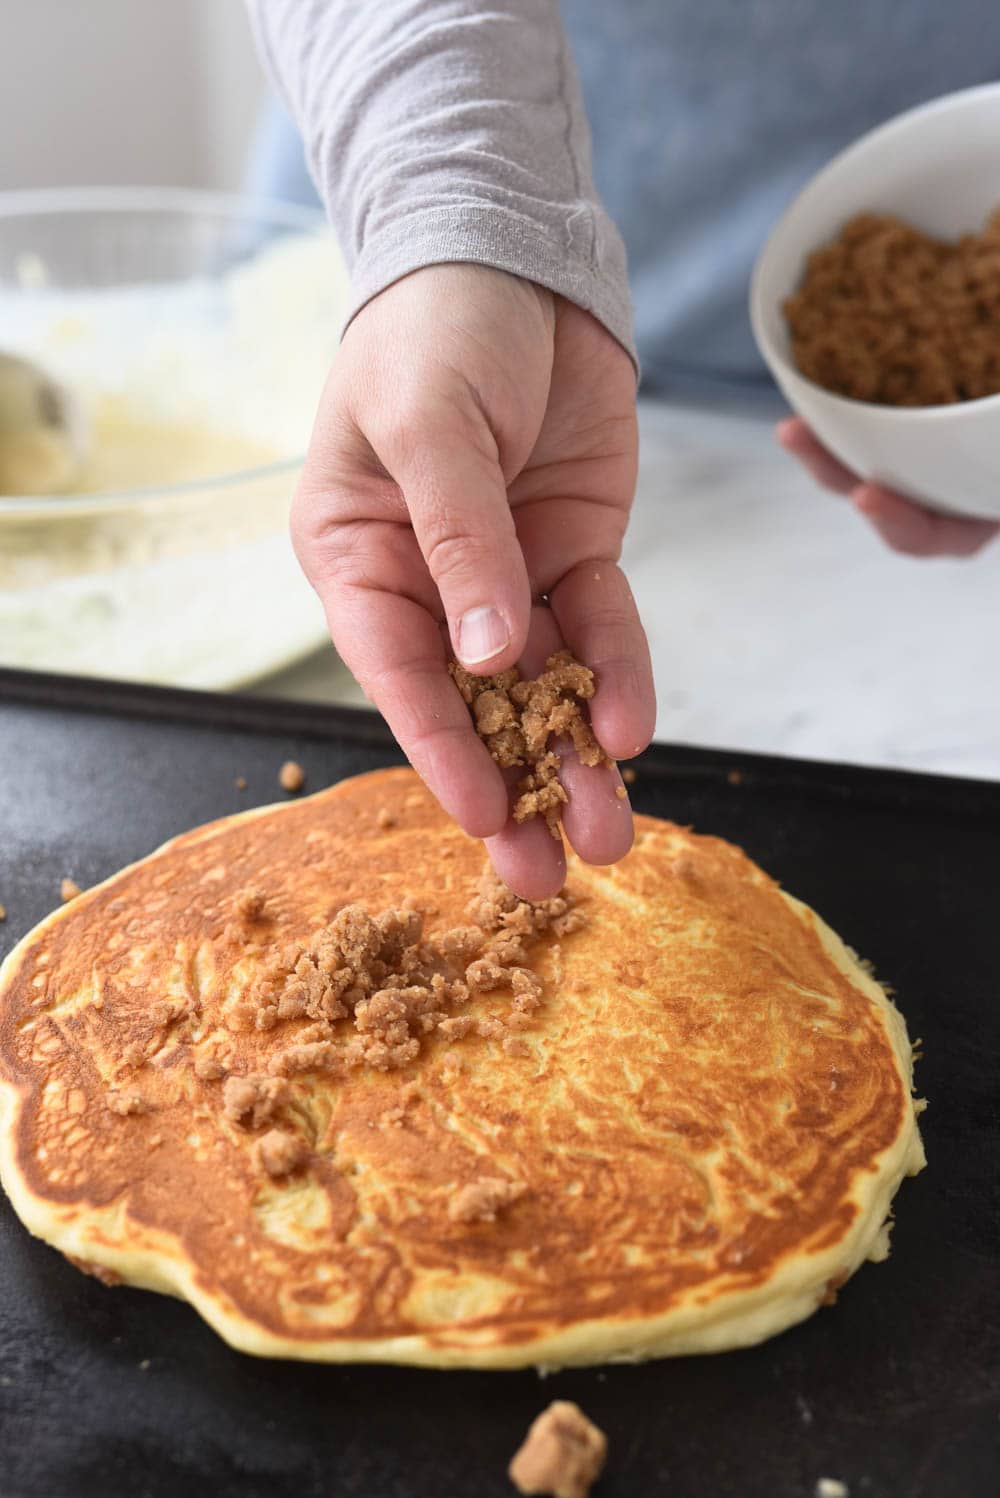 streusel topping being sprinkled onto pancake